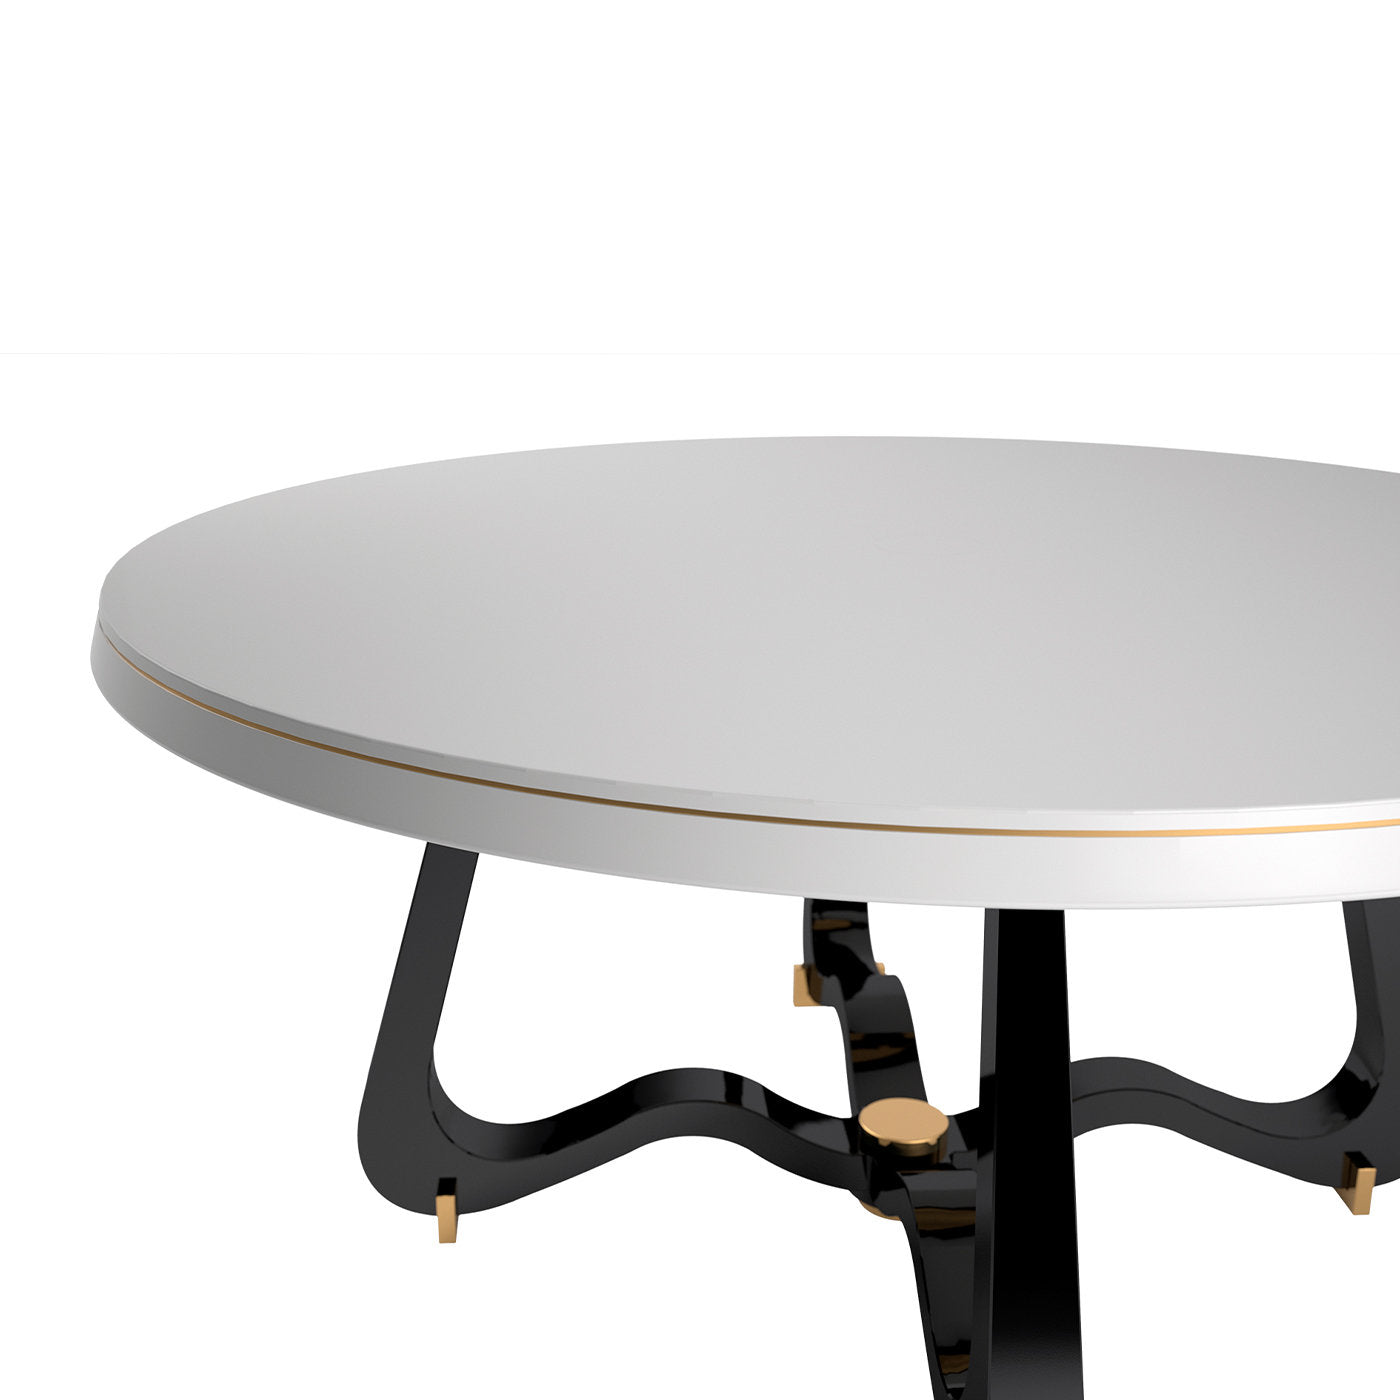 Wilde Dining Table #2 By Giannella Ventura - Alternative view 1